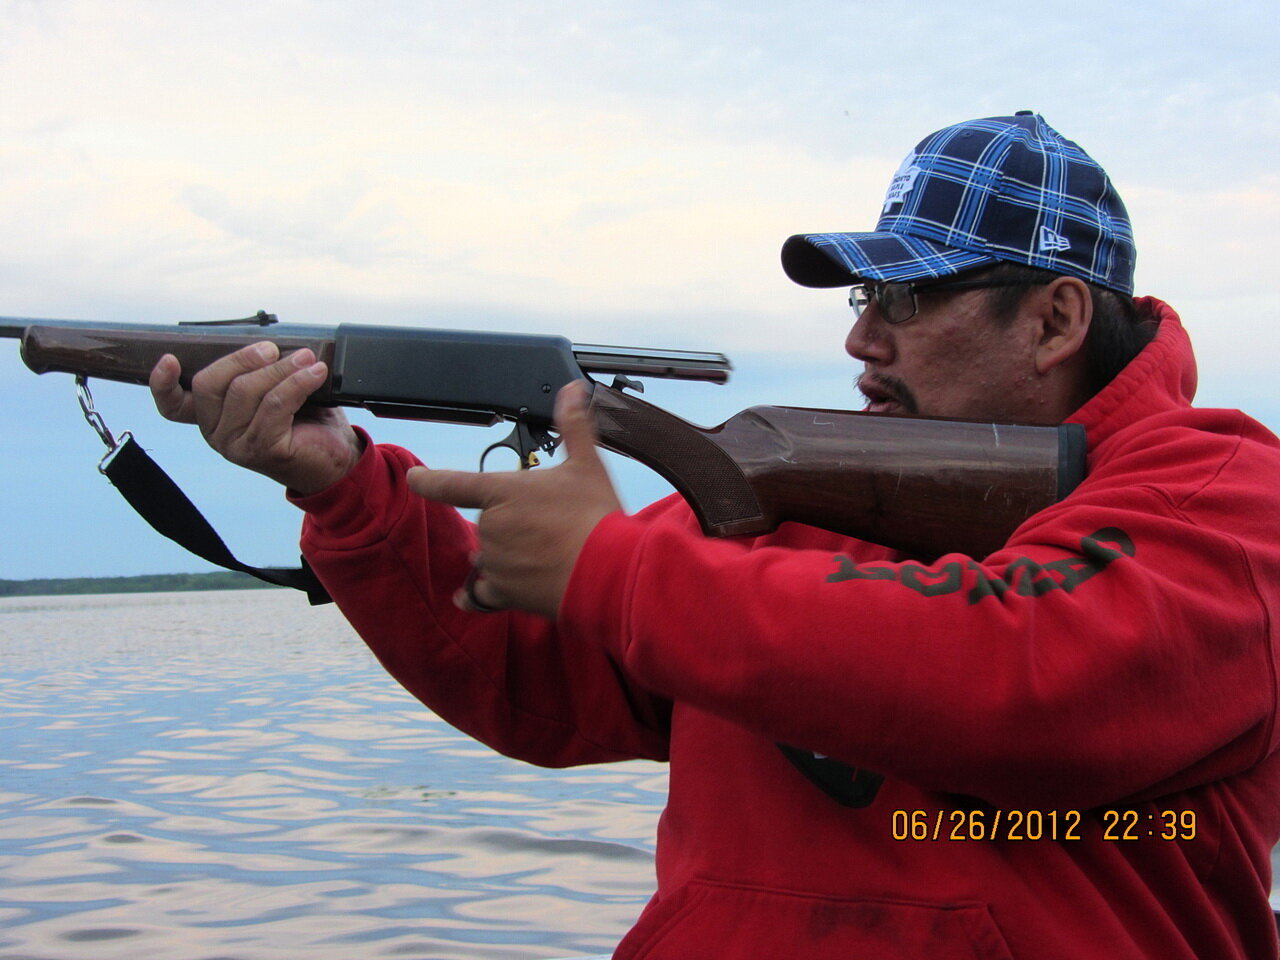 Photo 4: Harry Martha Papah in action, taking aim at a moose on Eabamet Lake, in the homeland of Eabametoong First Nation (Ontario), June 26, 2012.